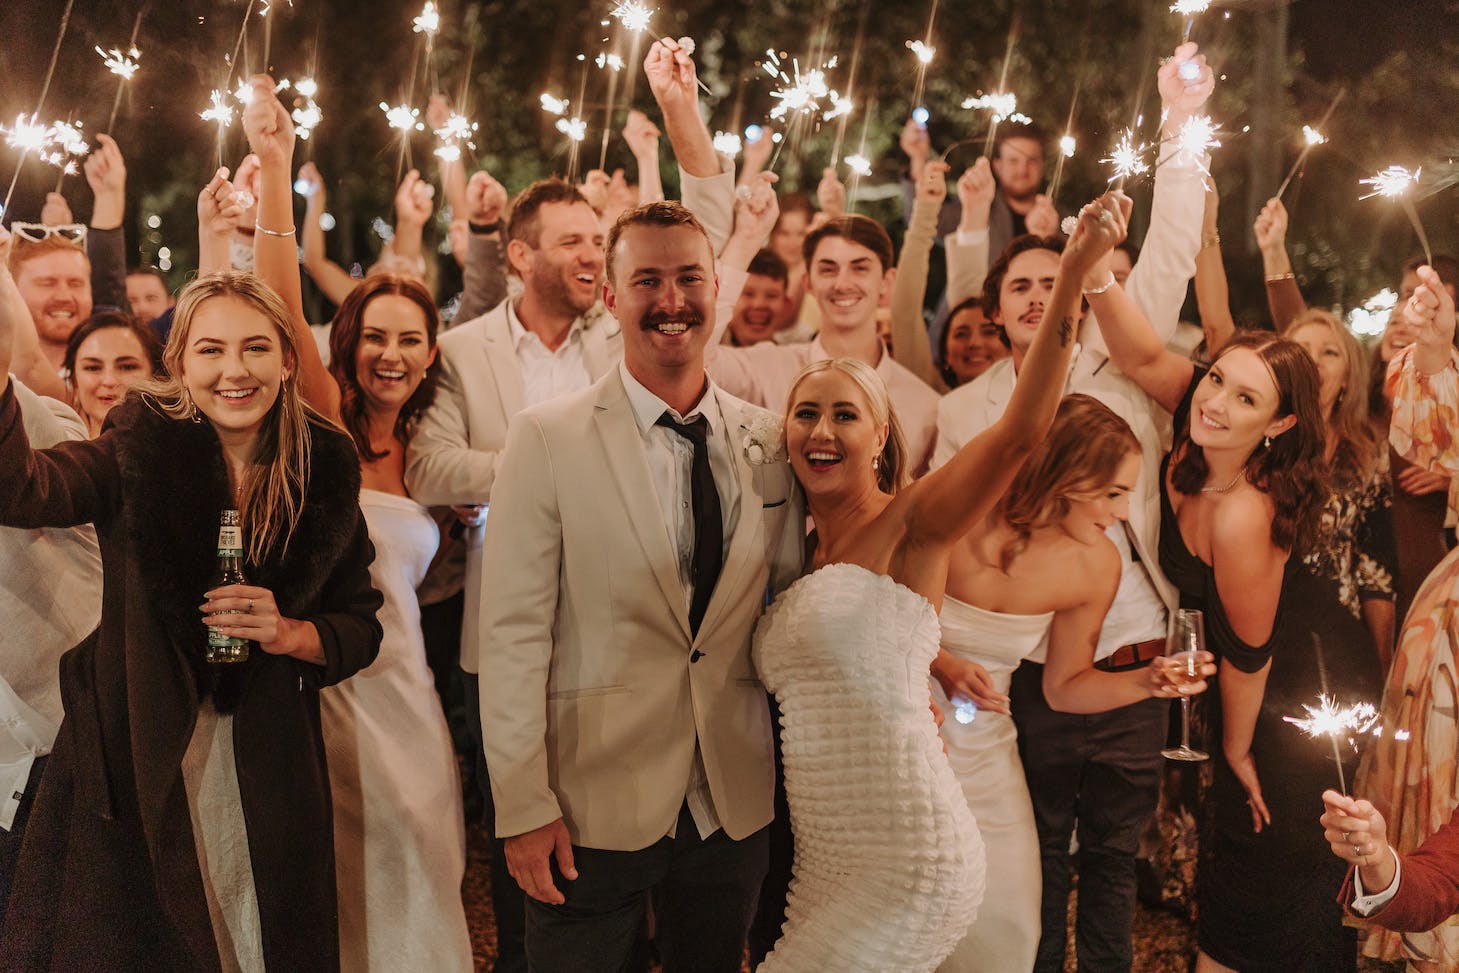 A joyful bride and groom are surrounded by friends and family holding sparklers at an outdoor celebration. The bride is in a white strapless dress, and the groom is in a light-colored suit with a black tie. Everyone is smiling, laughing, and enjoying the festive atmosphere.